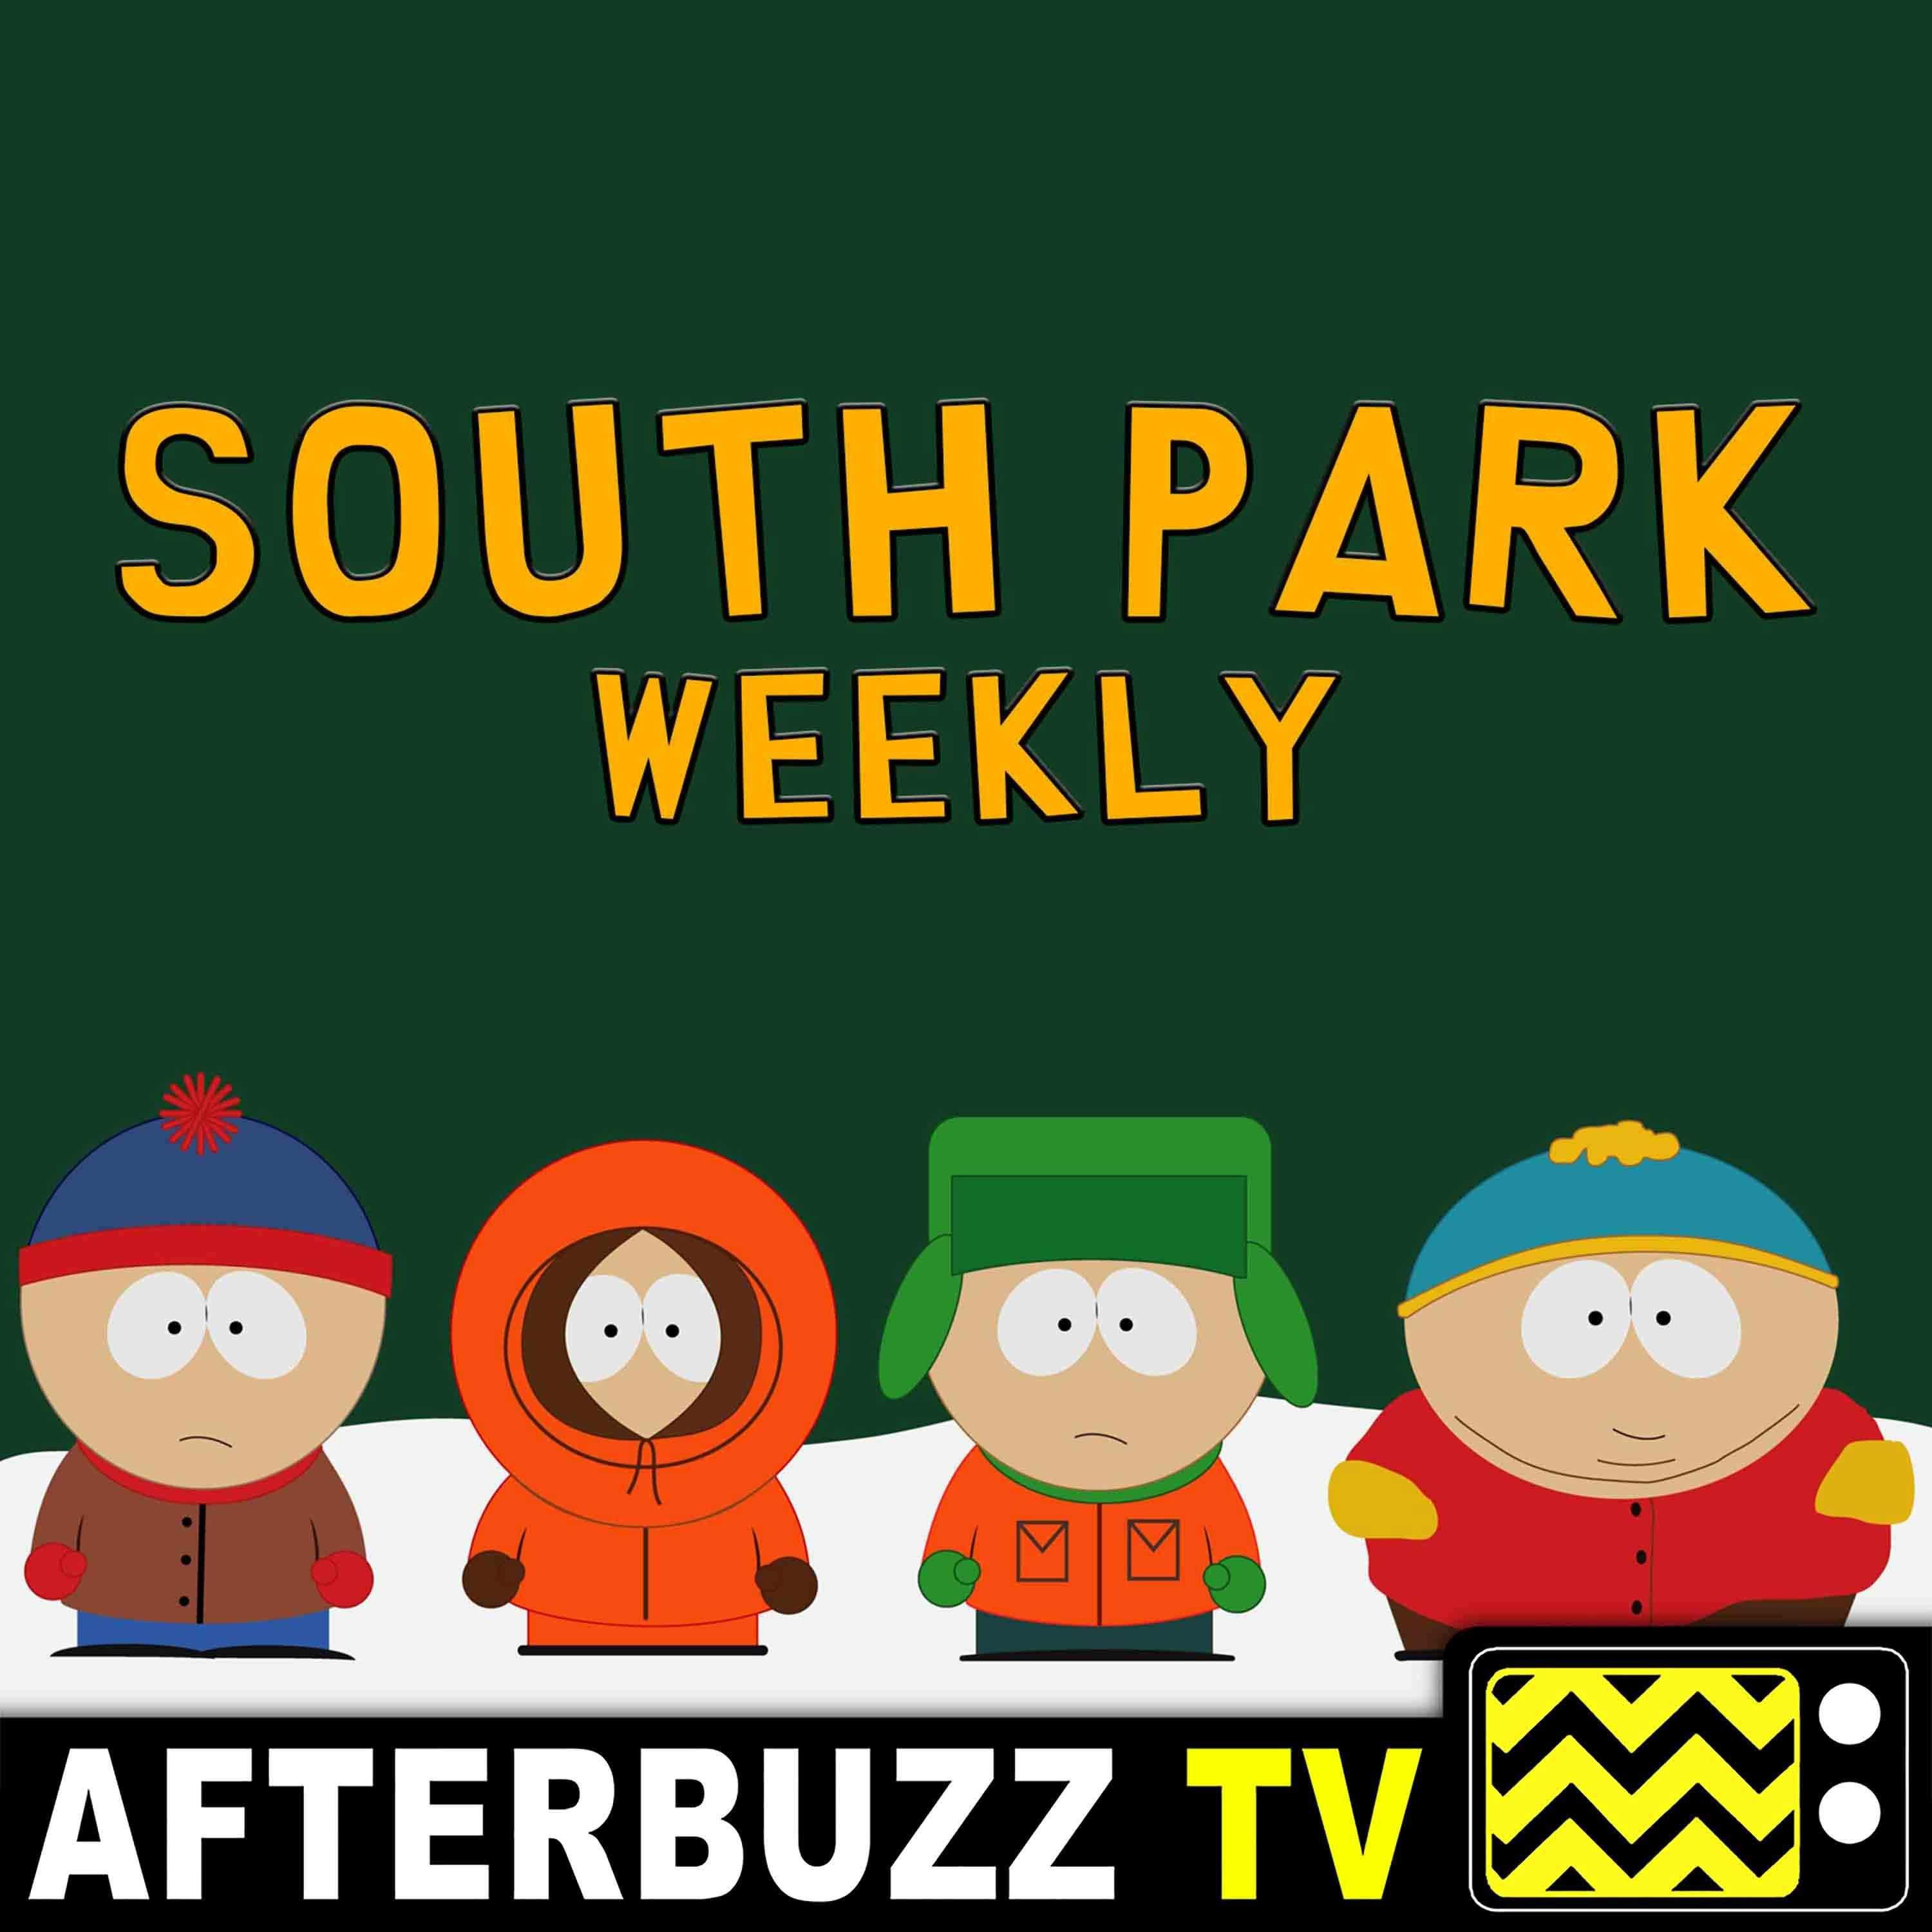 Best Celebrity Cameo Appearances – South Park Weekly